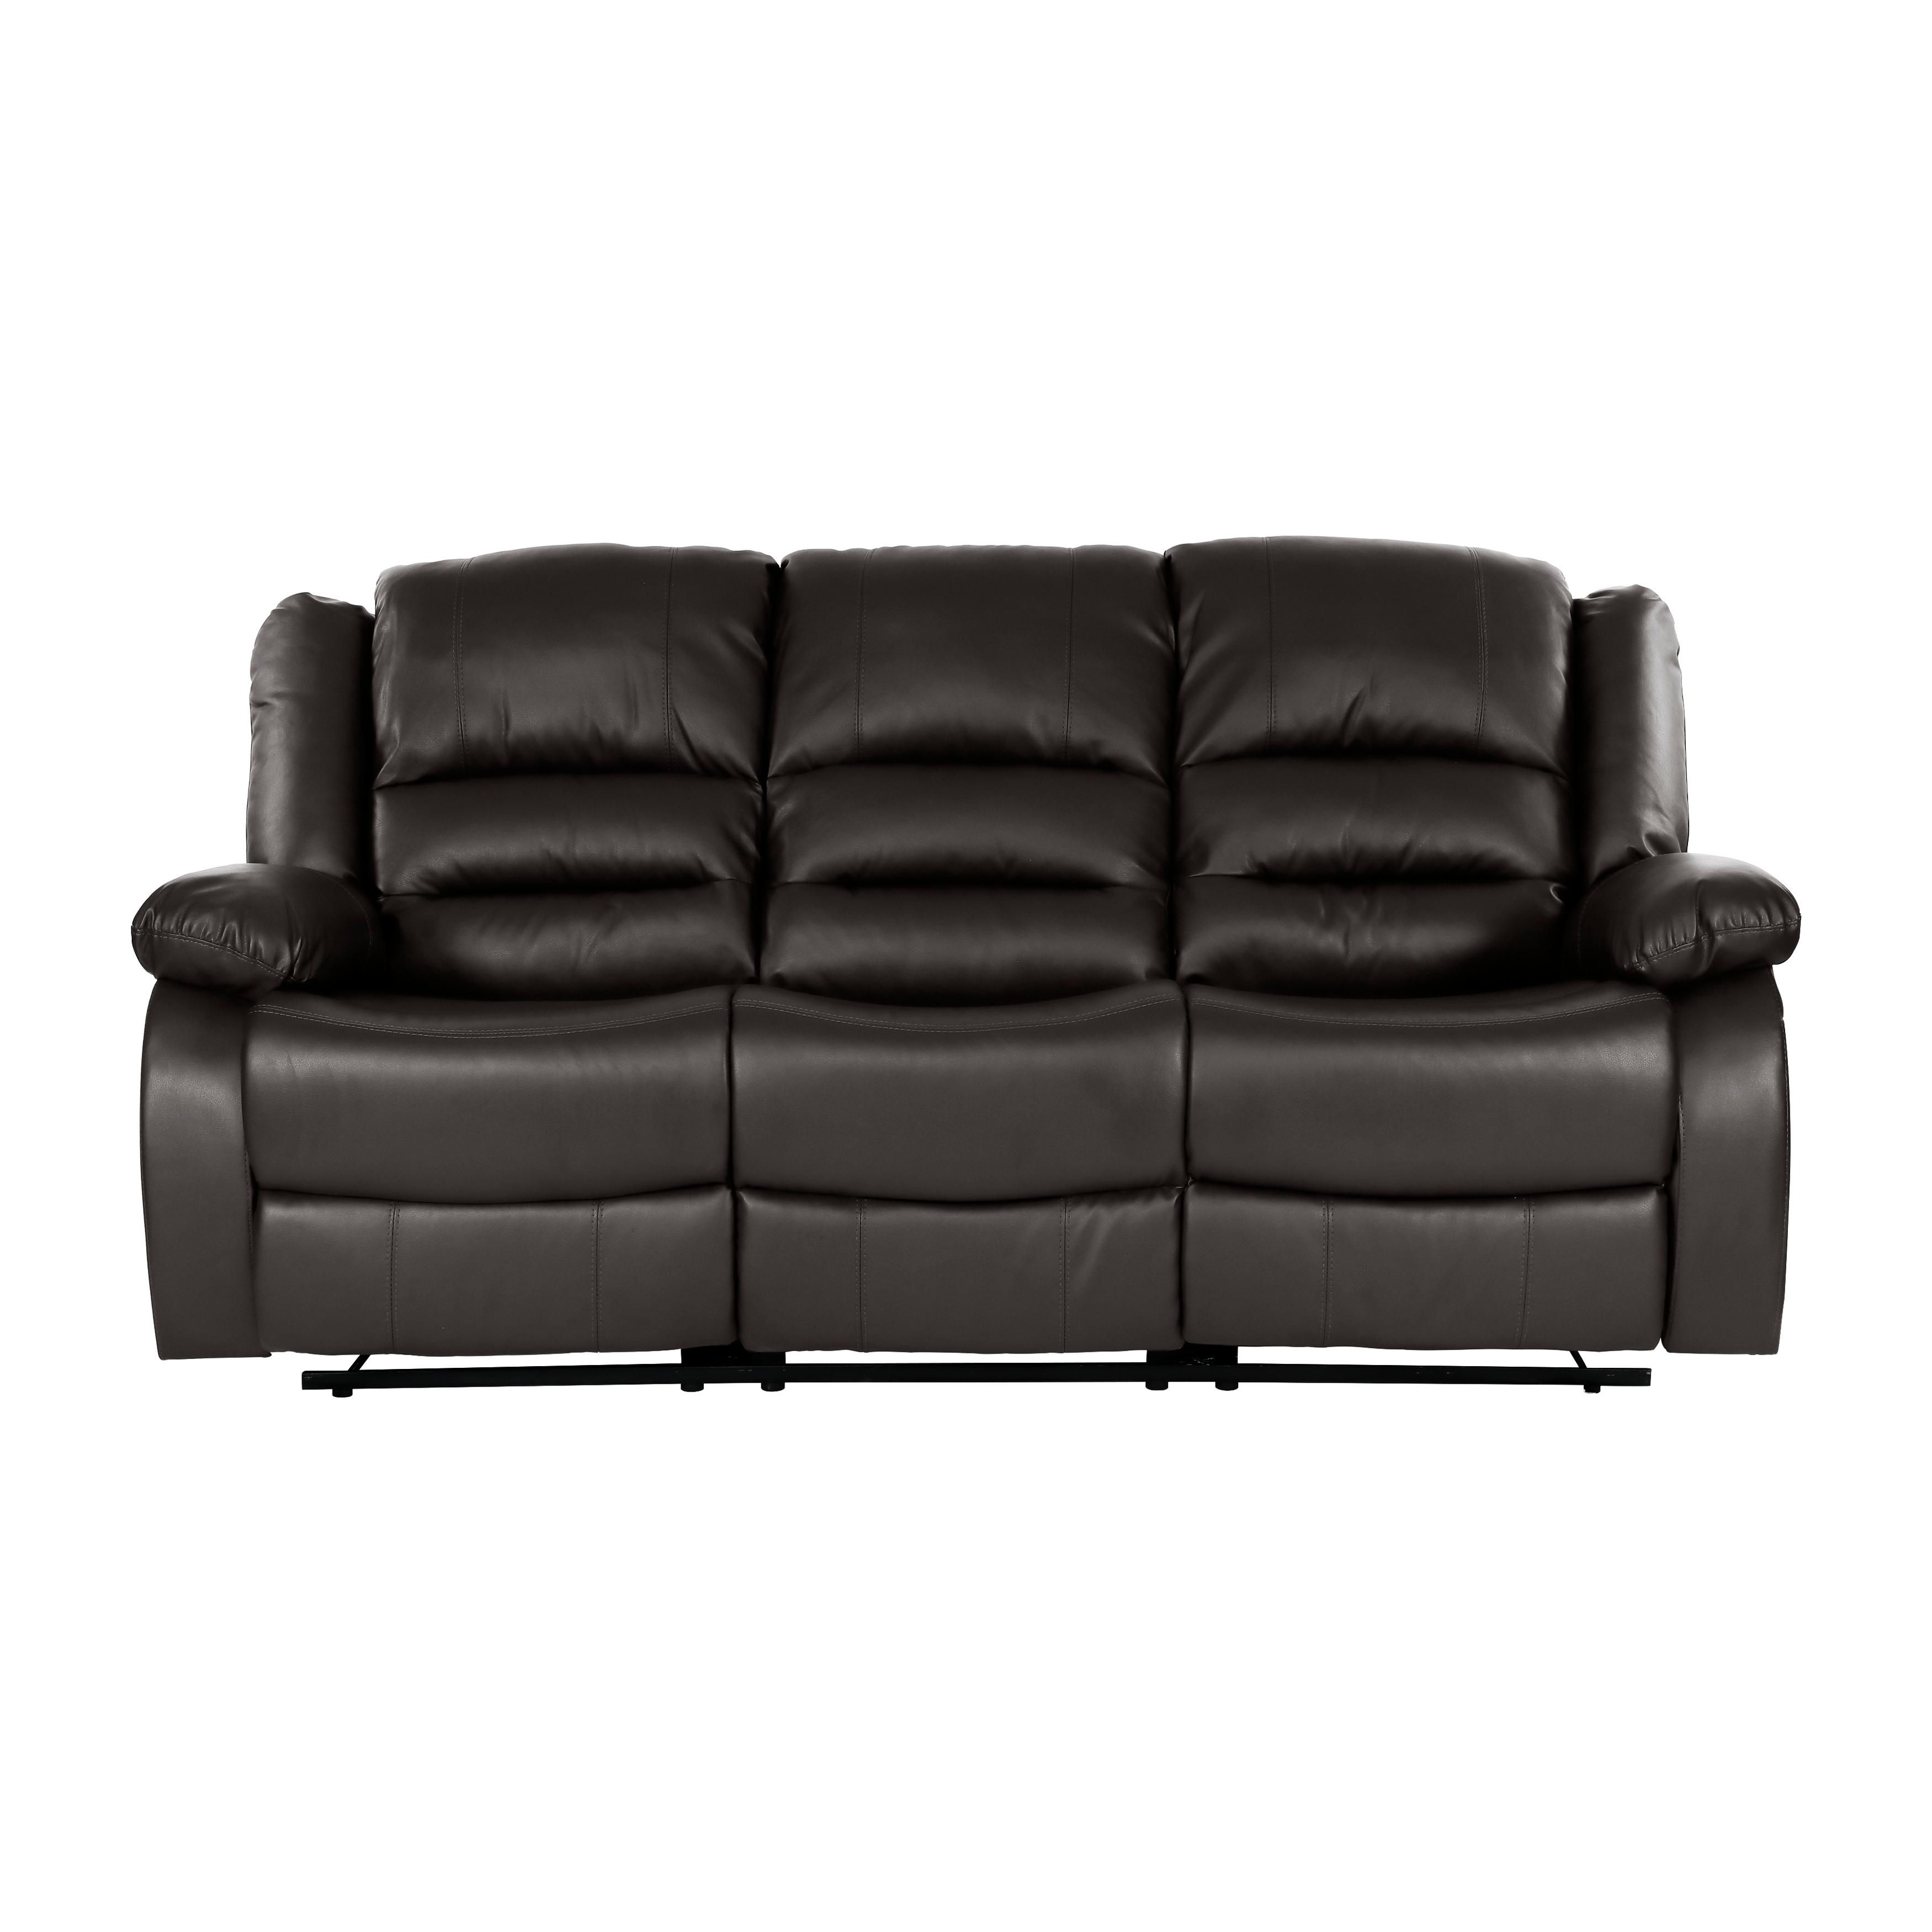 Transitional Recliner Sofa Jarita Recliner Sofa 8329BRW-3-S 8329BRW-3-S in Brown Faux Leather